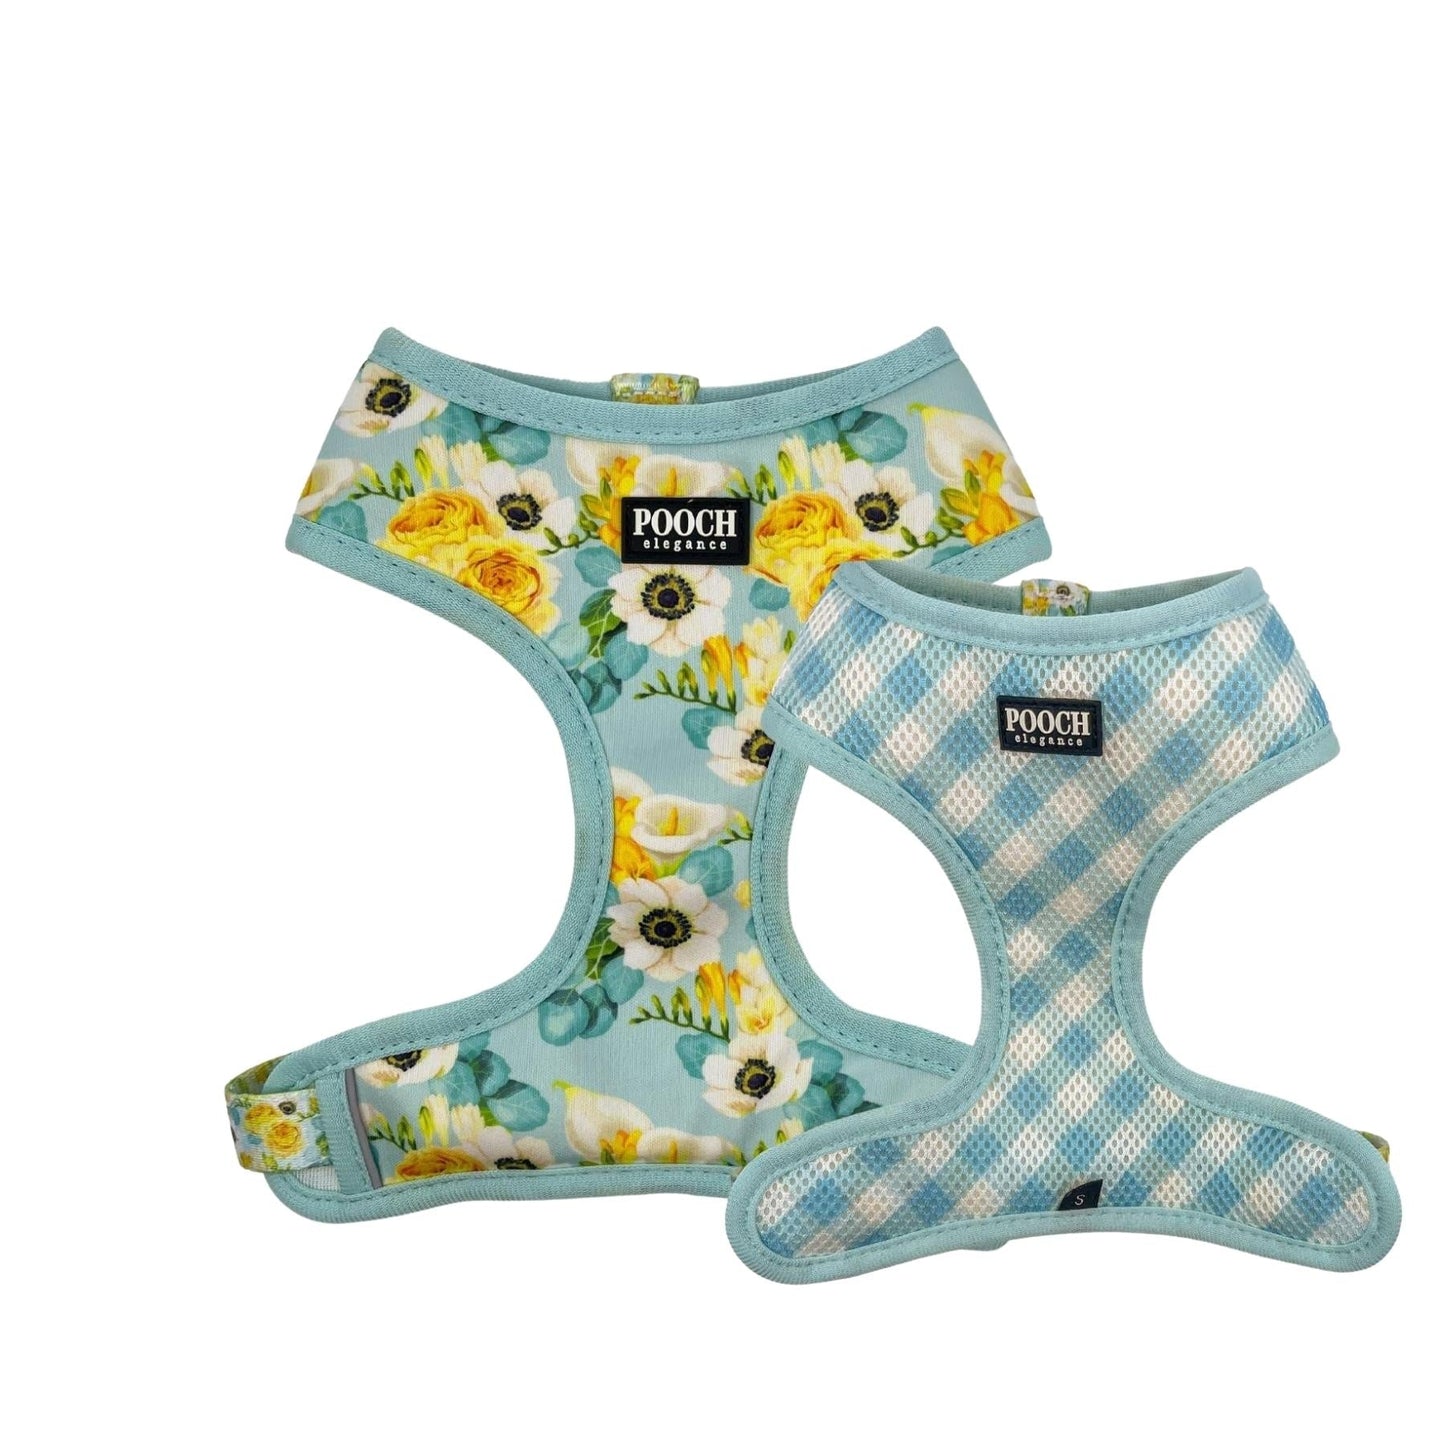 Spring Blooms Reversible Dog Harness - Pooch Luxury